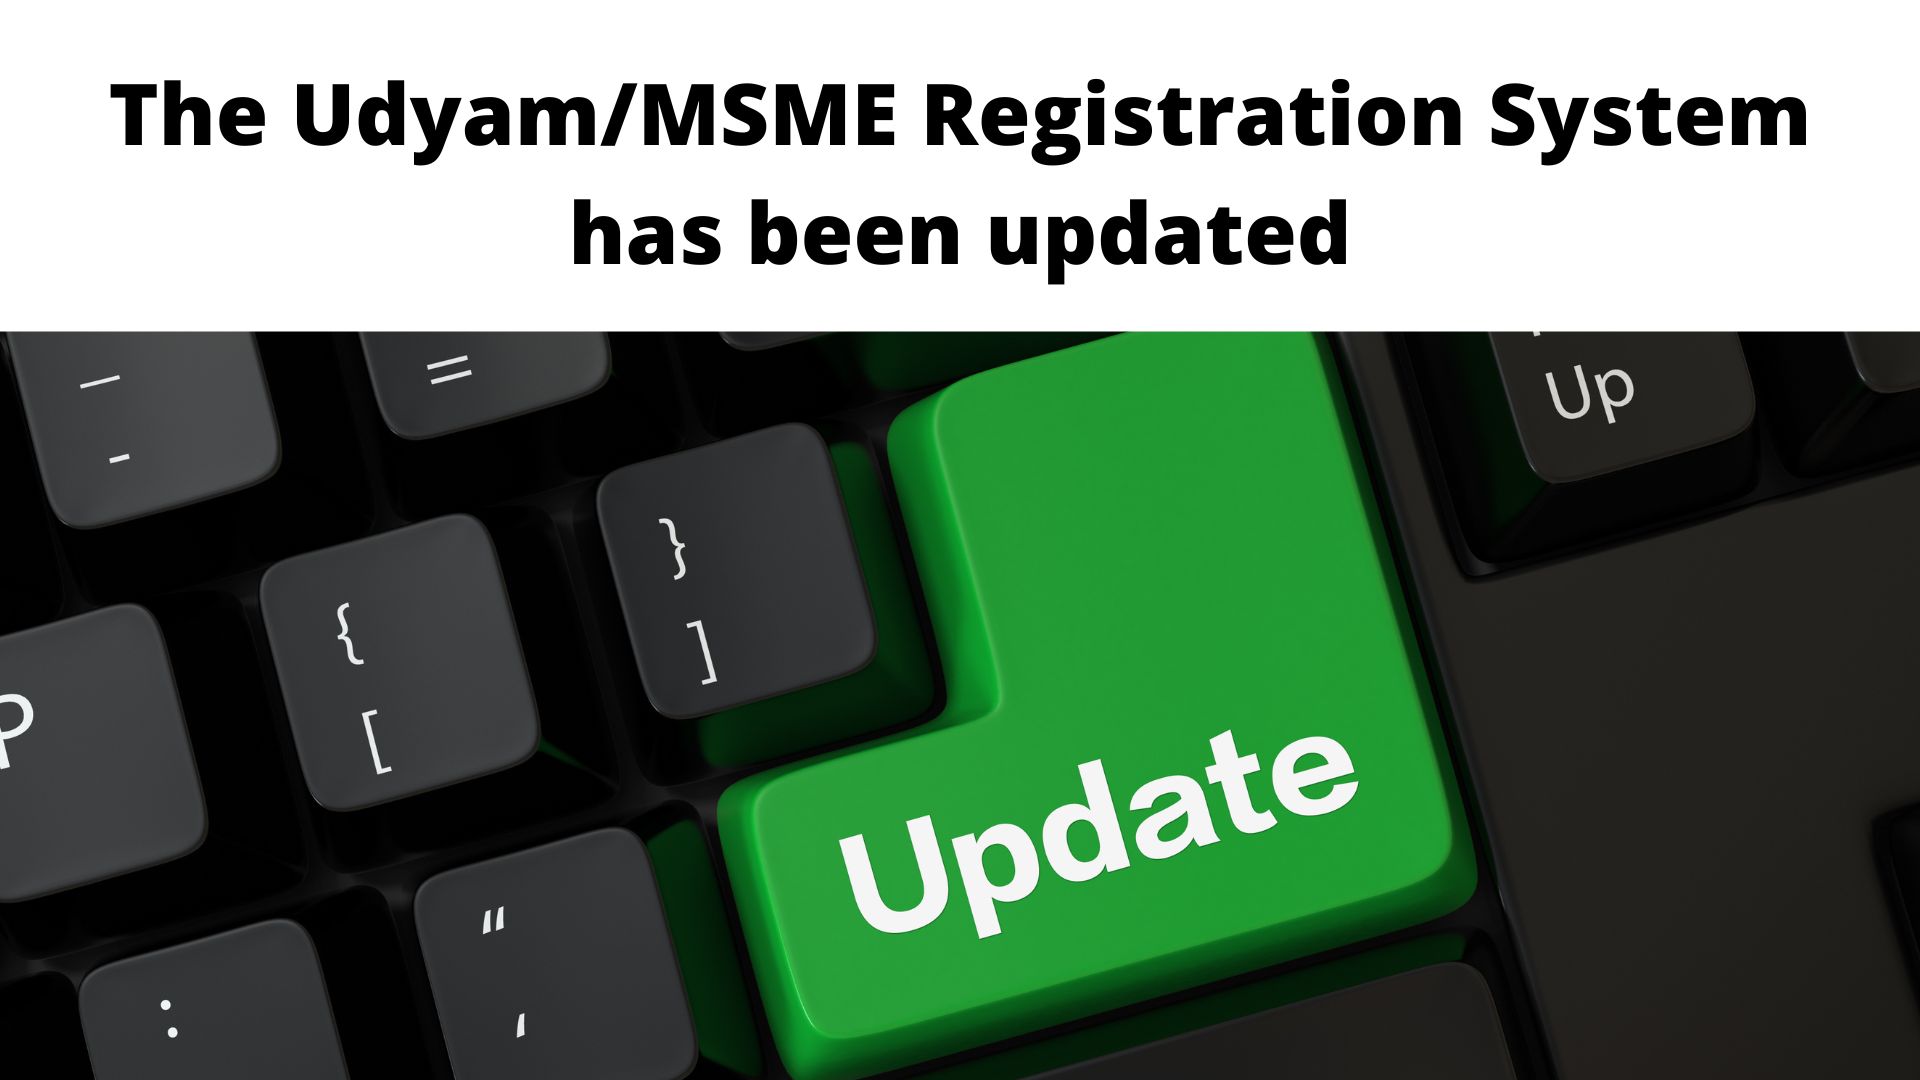 The Udyam MSME Registration System has been updated